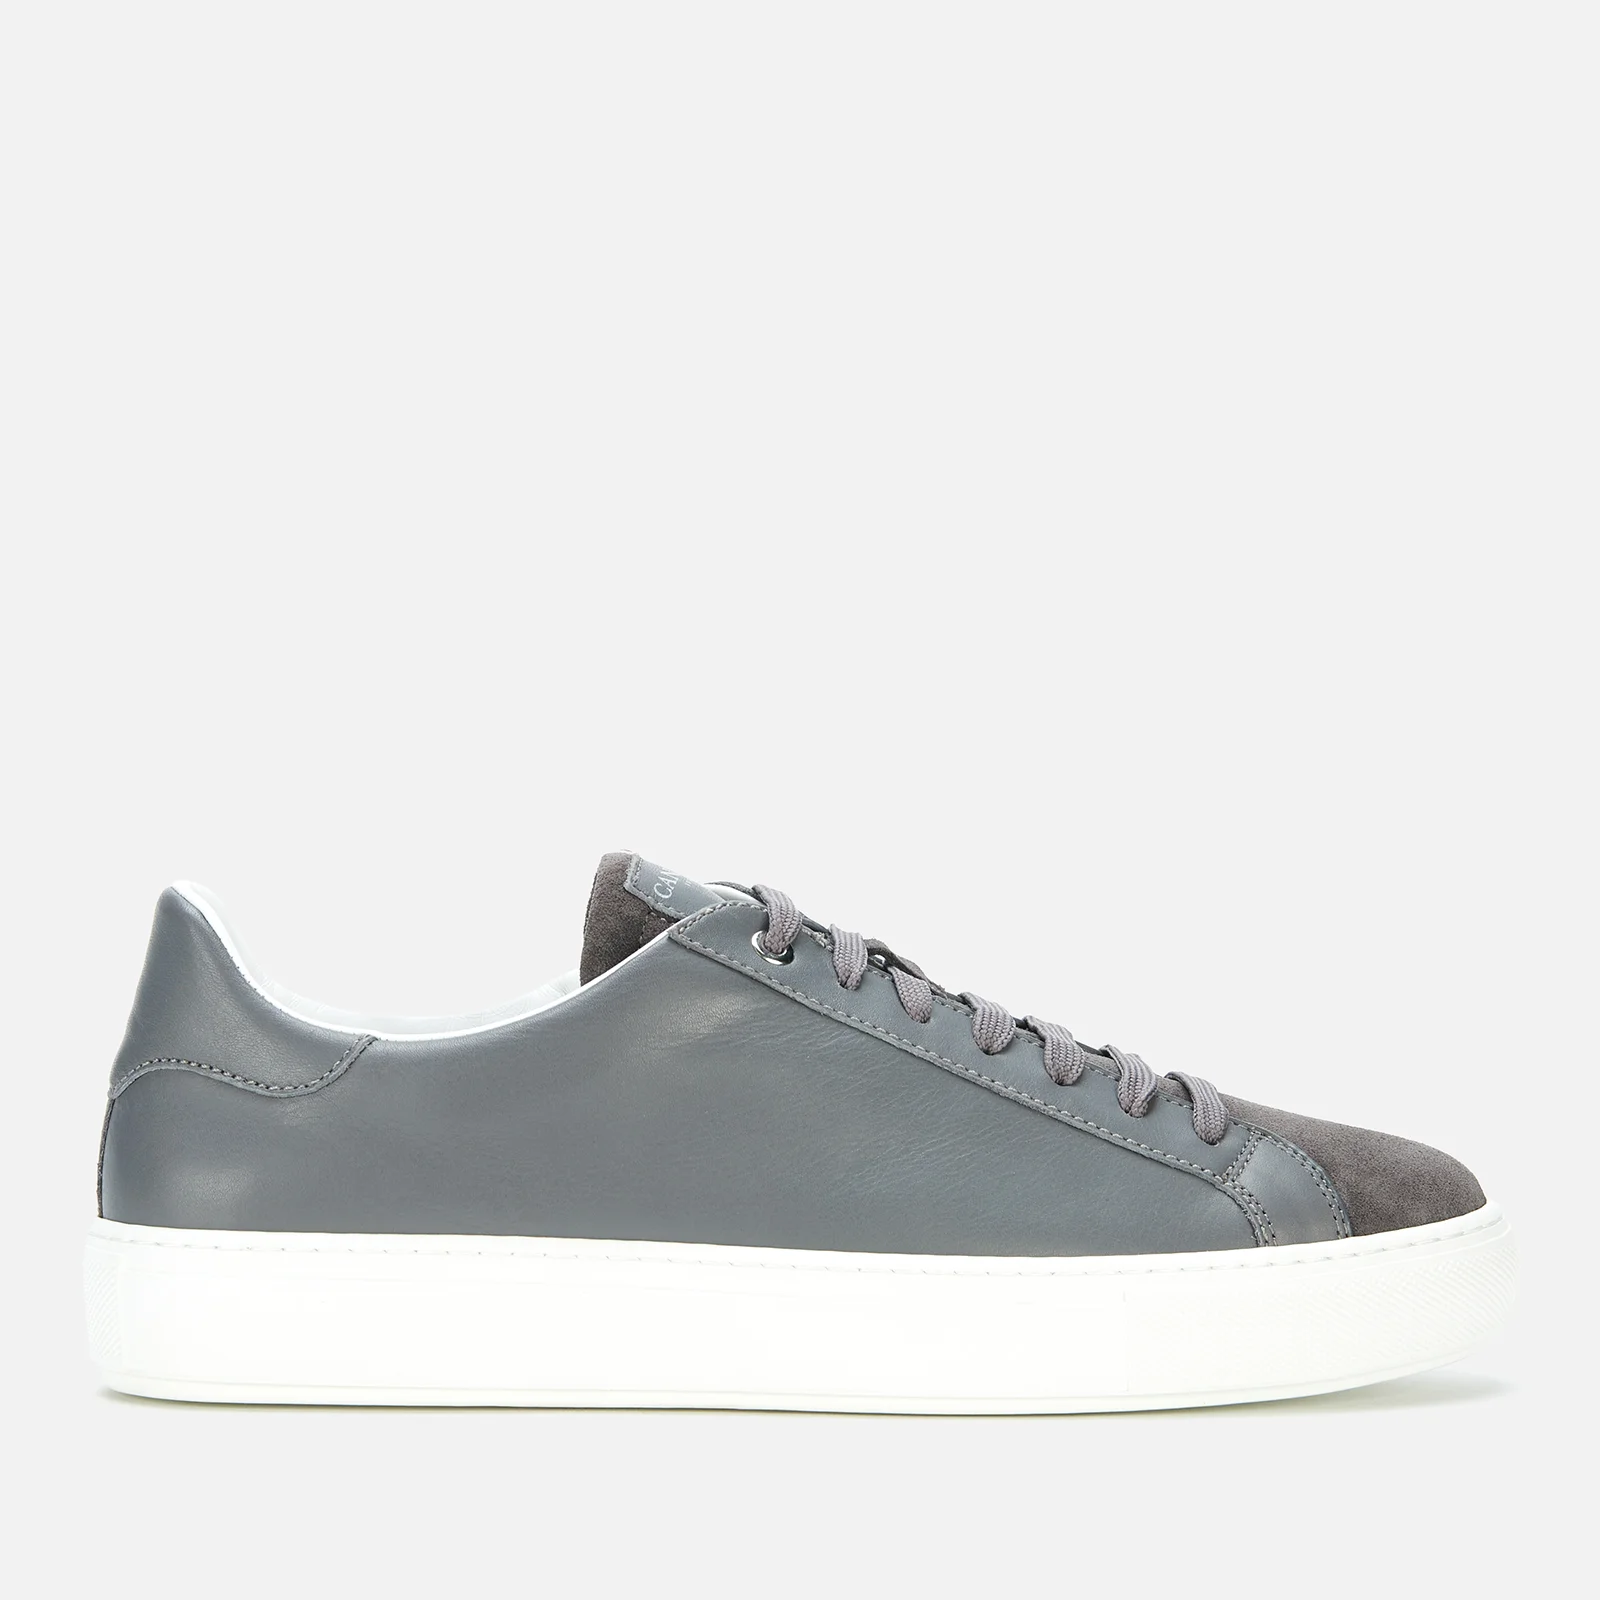 Canali Men's Lace Up Classic Leather Sneakers - Grey Image 1